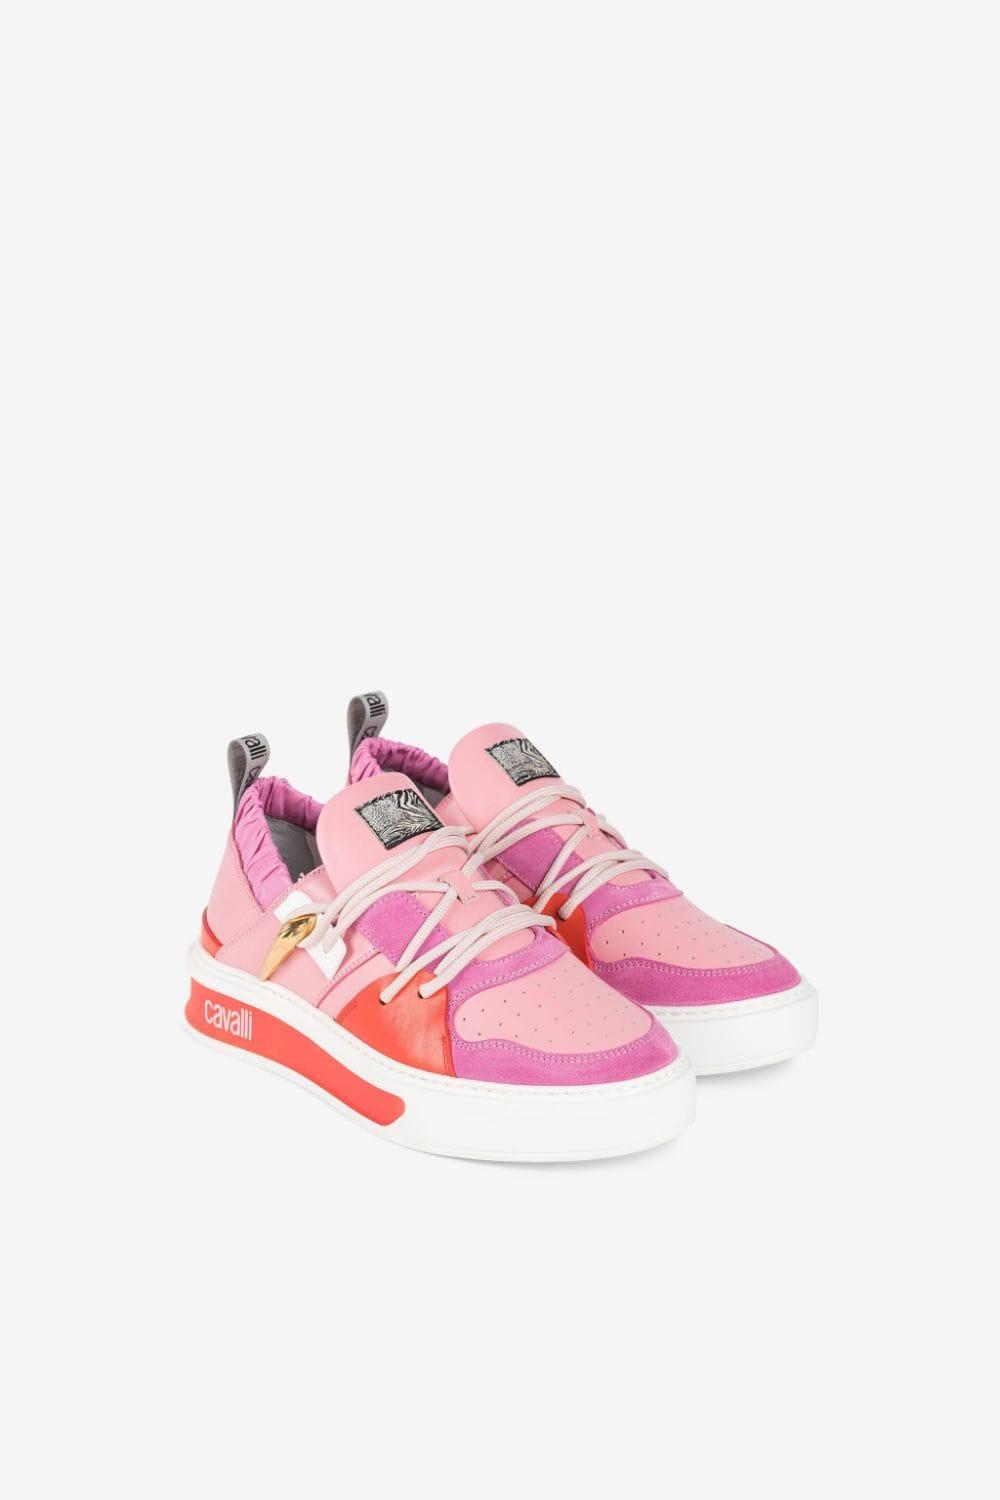 Roberto Cavalli Tiger Tooth Sneakers in Pink | Lyst